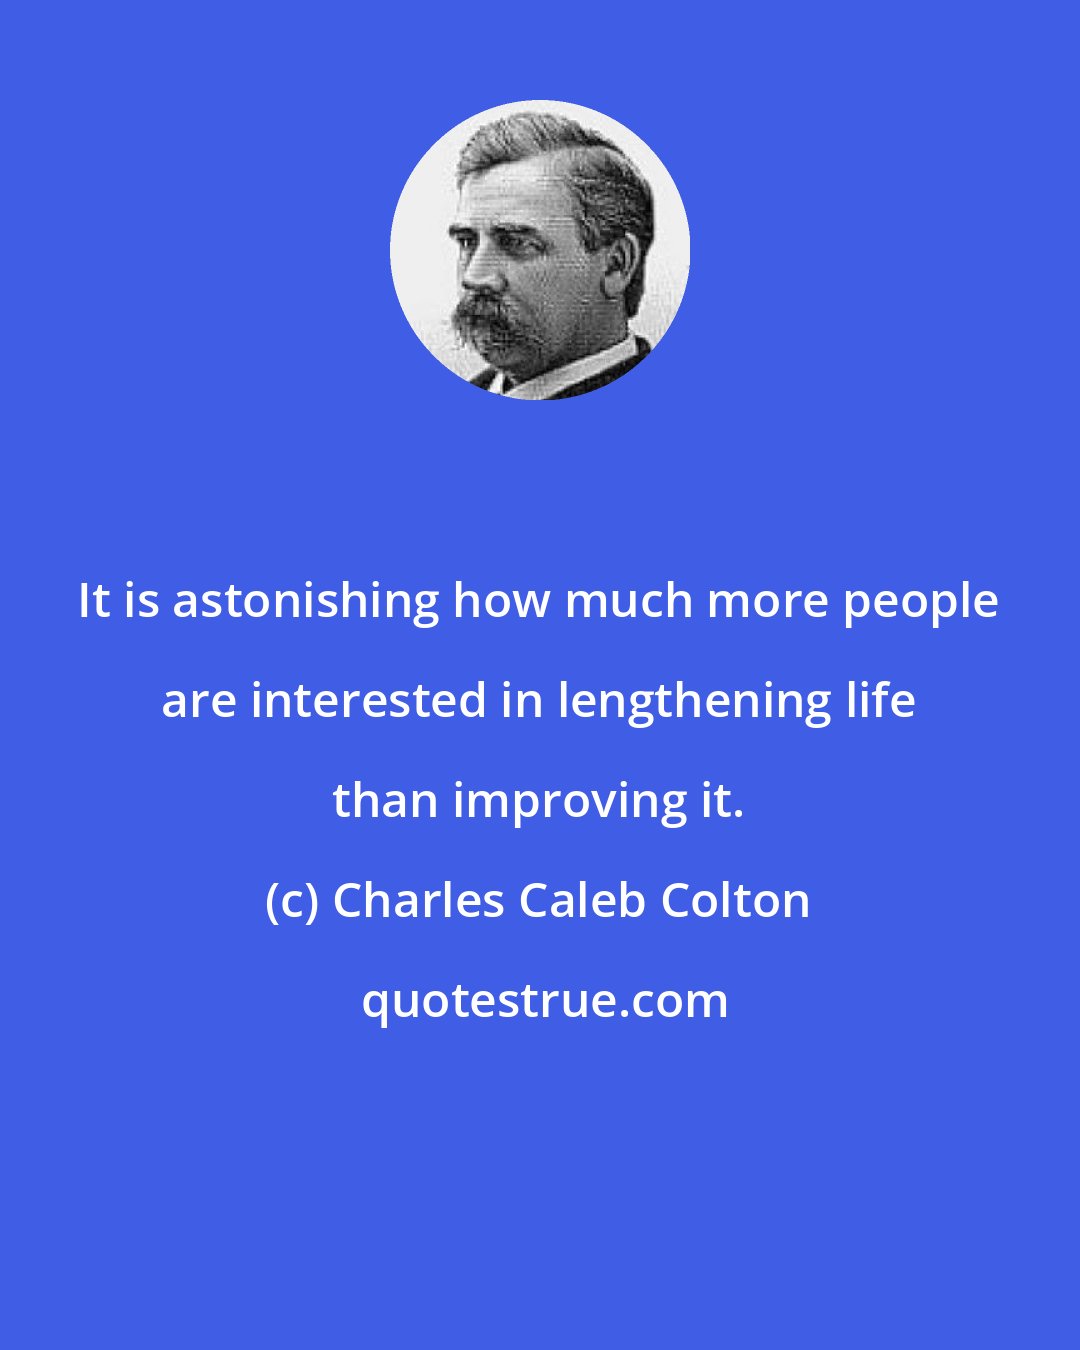 Charles Caleb Colton: It is astonishing how much more people are interested in lengthening life than improving it.